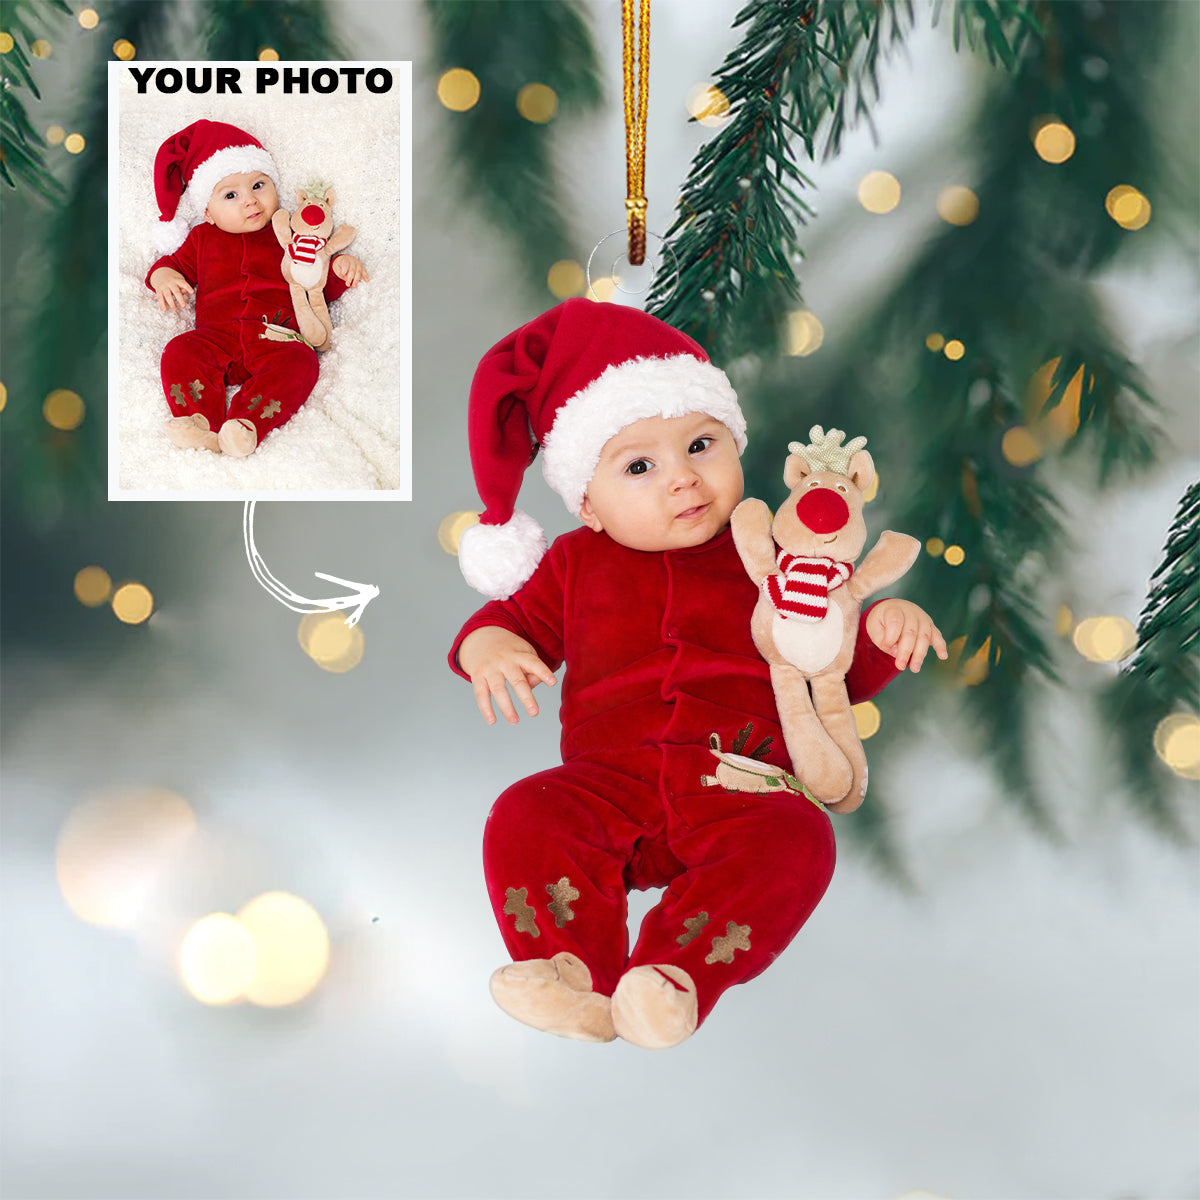 Personalized Photo Mica Ornament - Christmas Gift For Family Member, Friends -  Customized Your Photo Baby Ornament